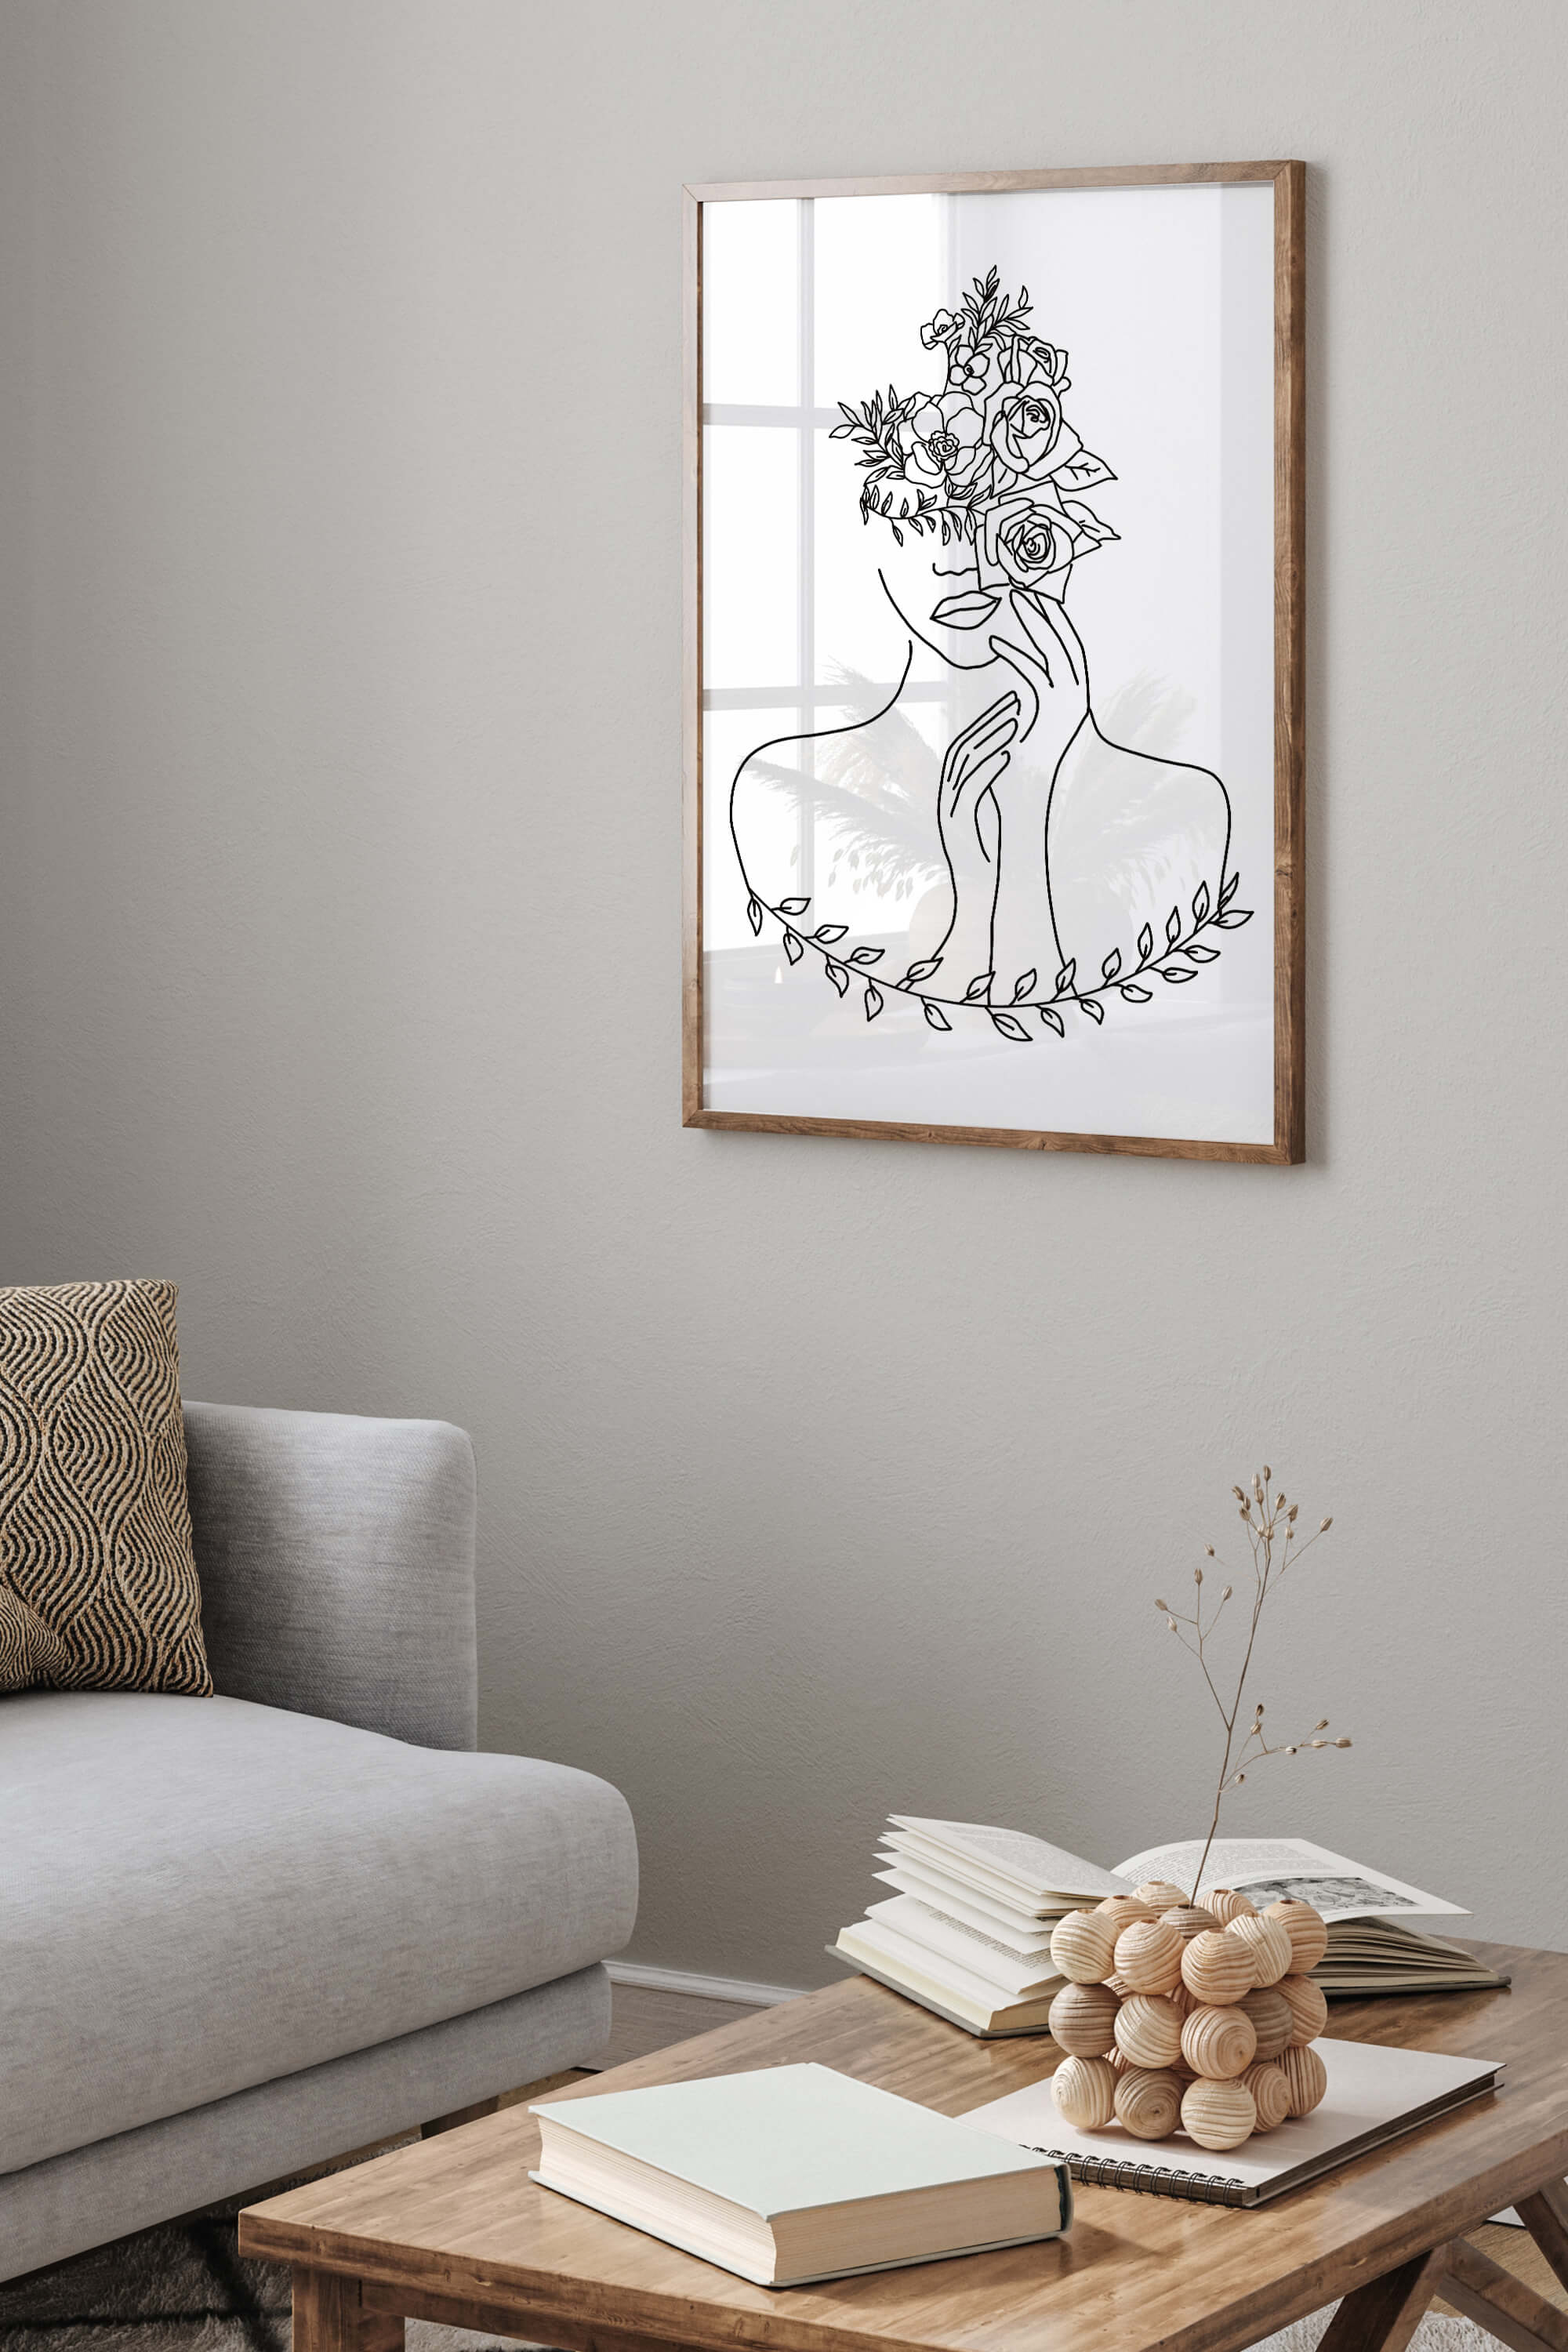 Immerse yourself in the allure of contemporary design with this monochrome wall art. The clean lines and modern aesthetic create a visually appealing piece that effortlessly complements various interior styles.